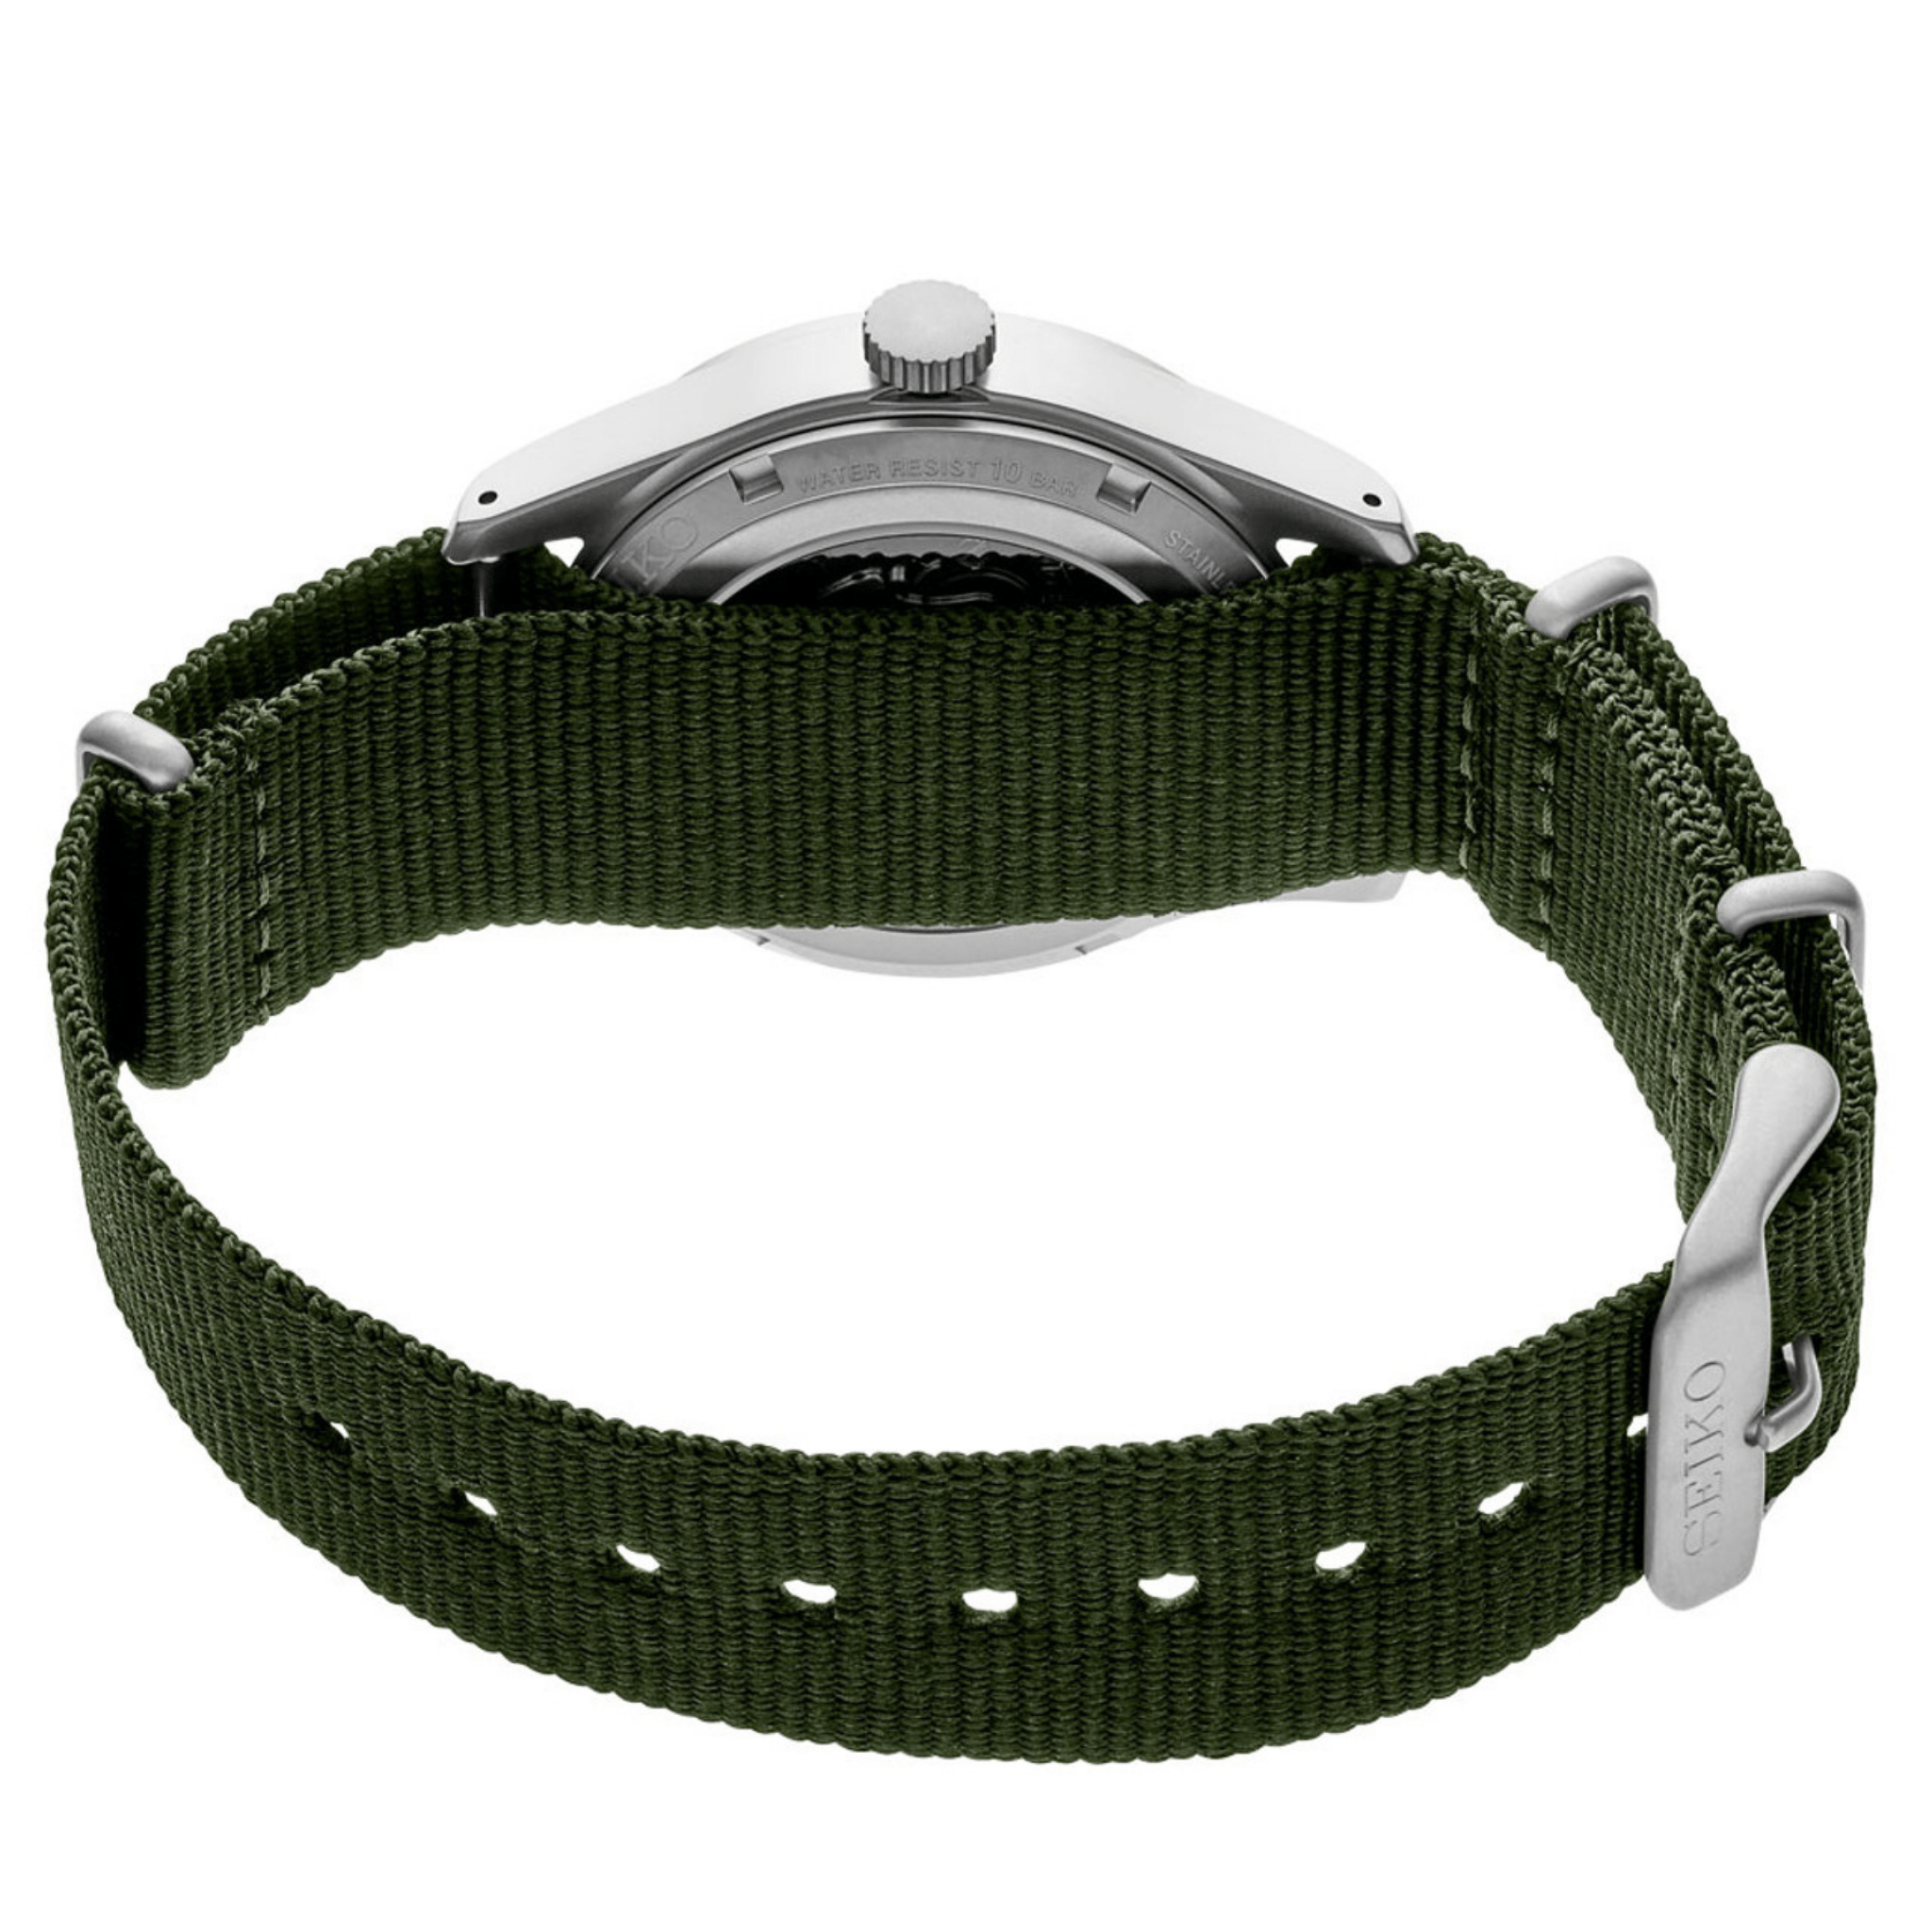 5 Sports Fields Sports Style Green Dial SRPG33 back view